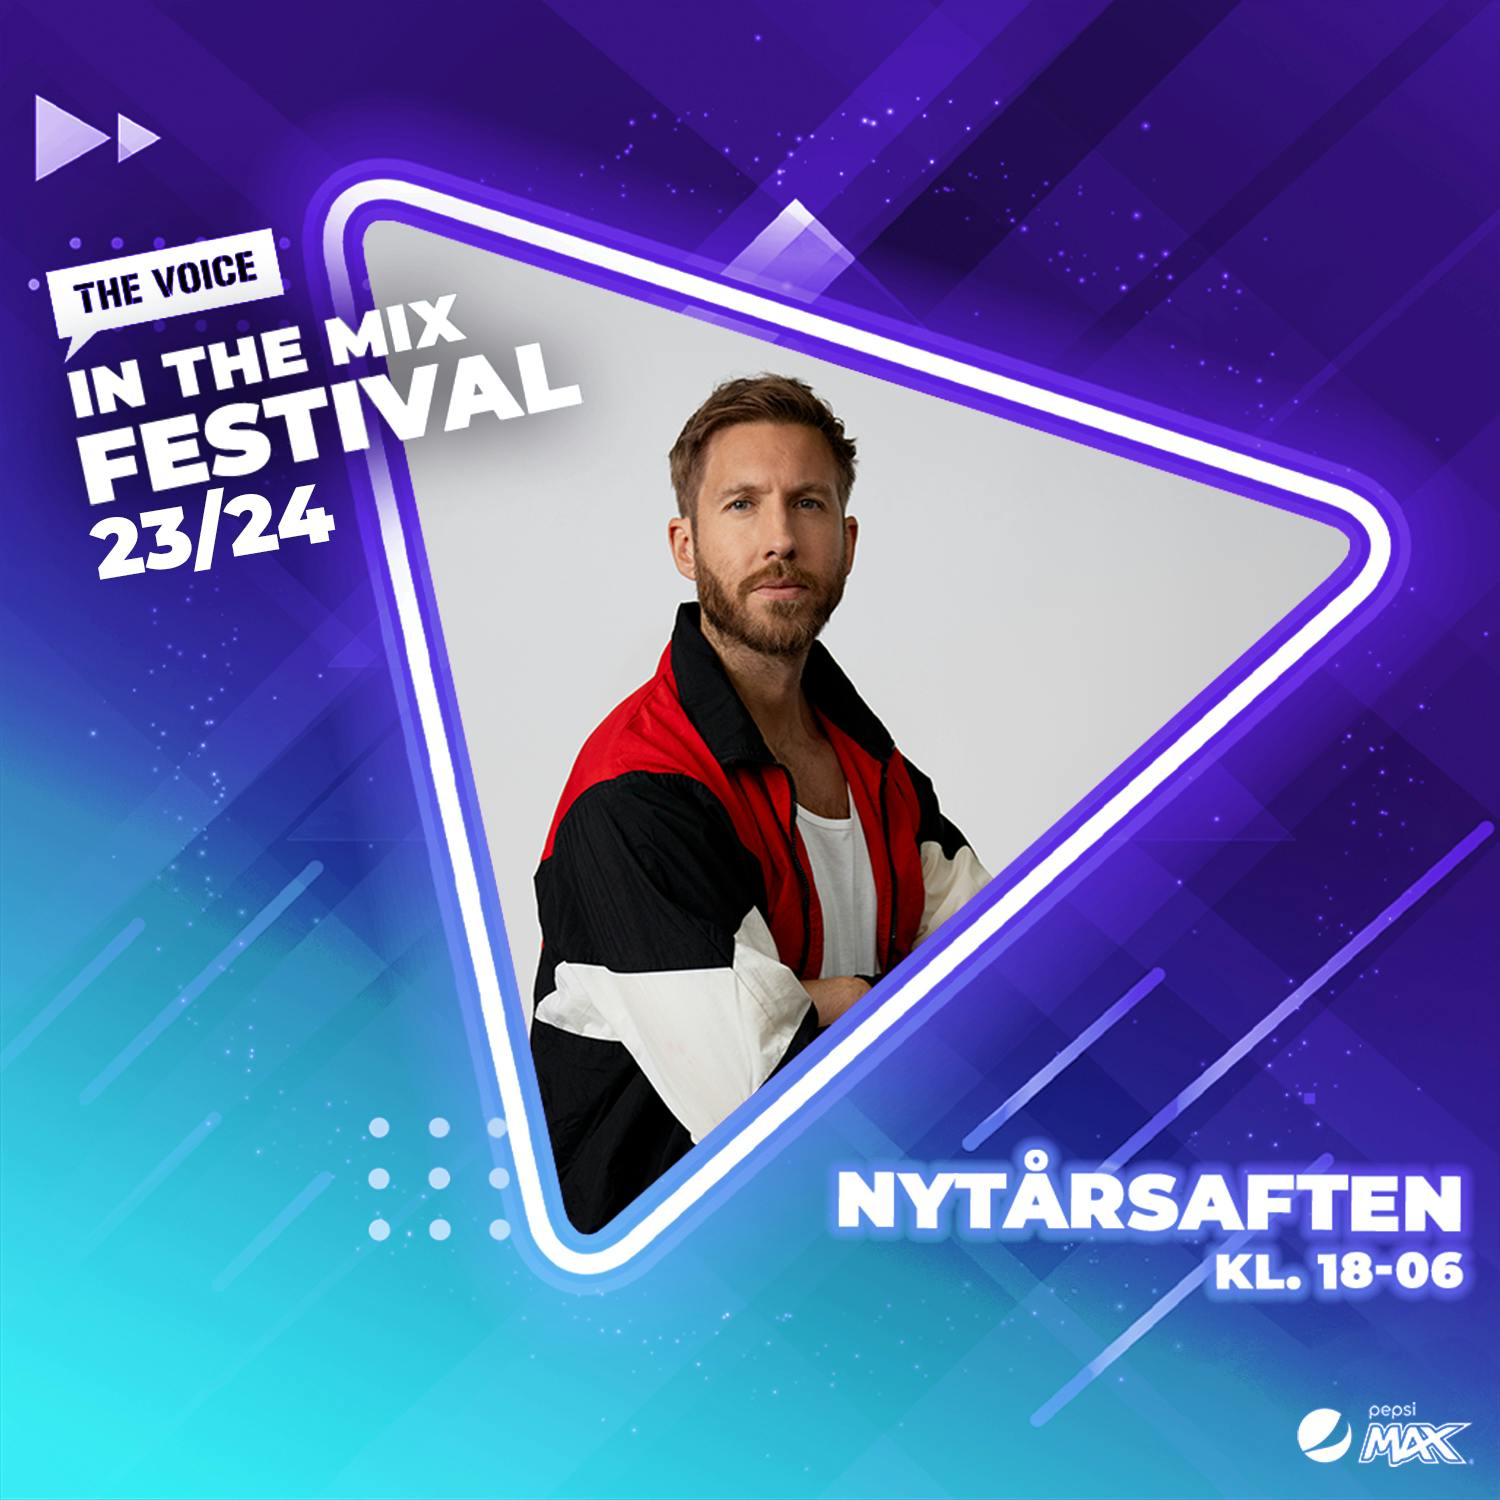 Calvin Harris  - The Voice In The Mix Festival 23/24